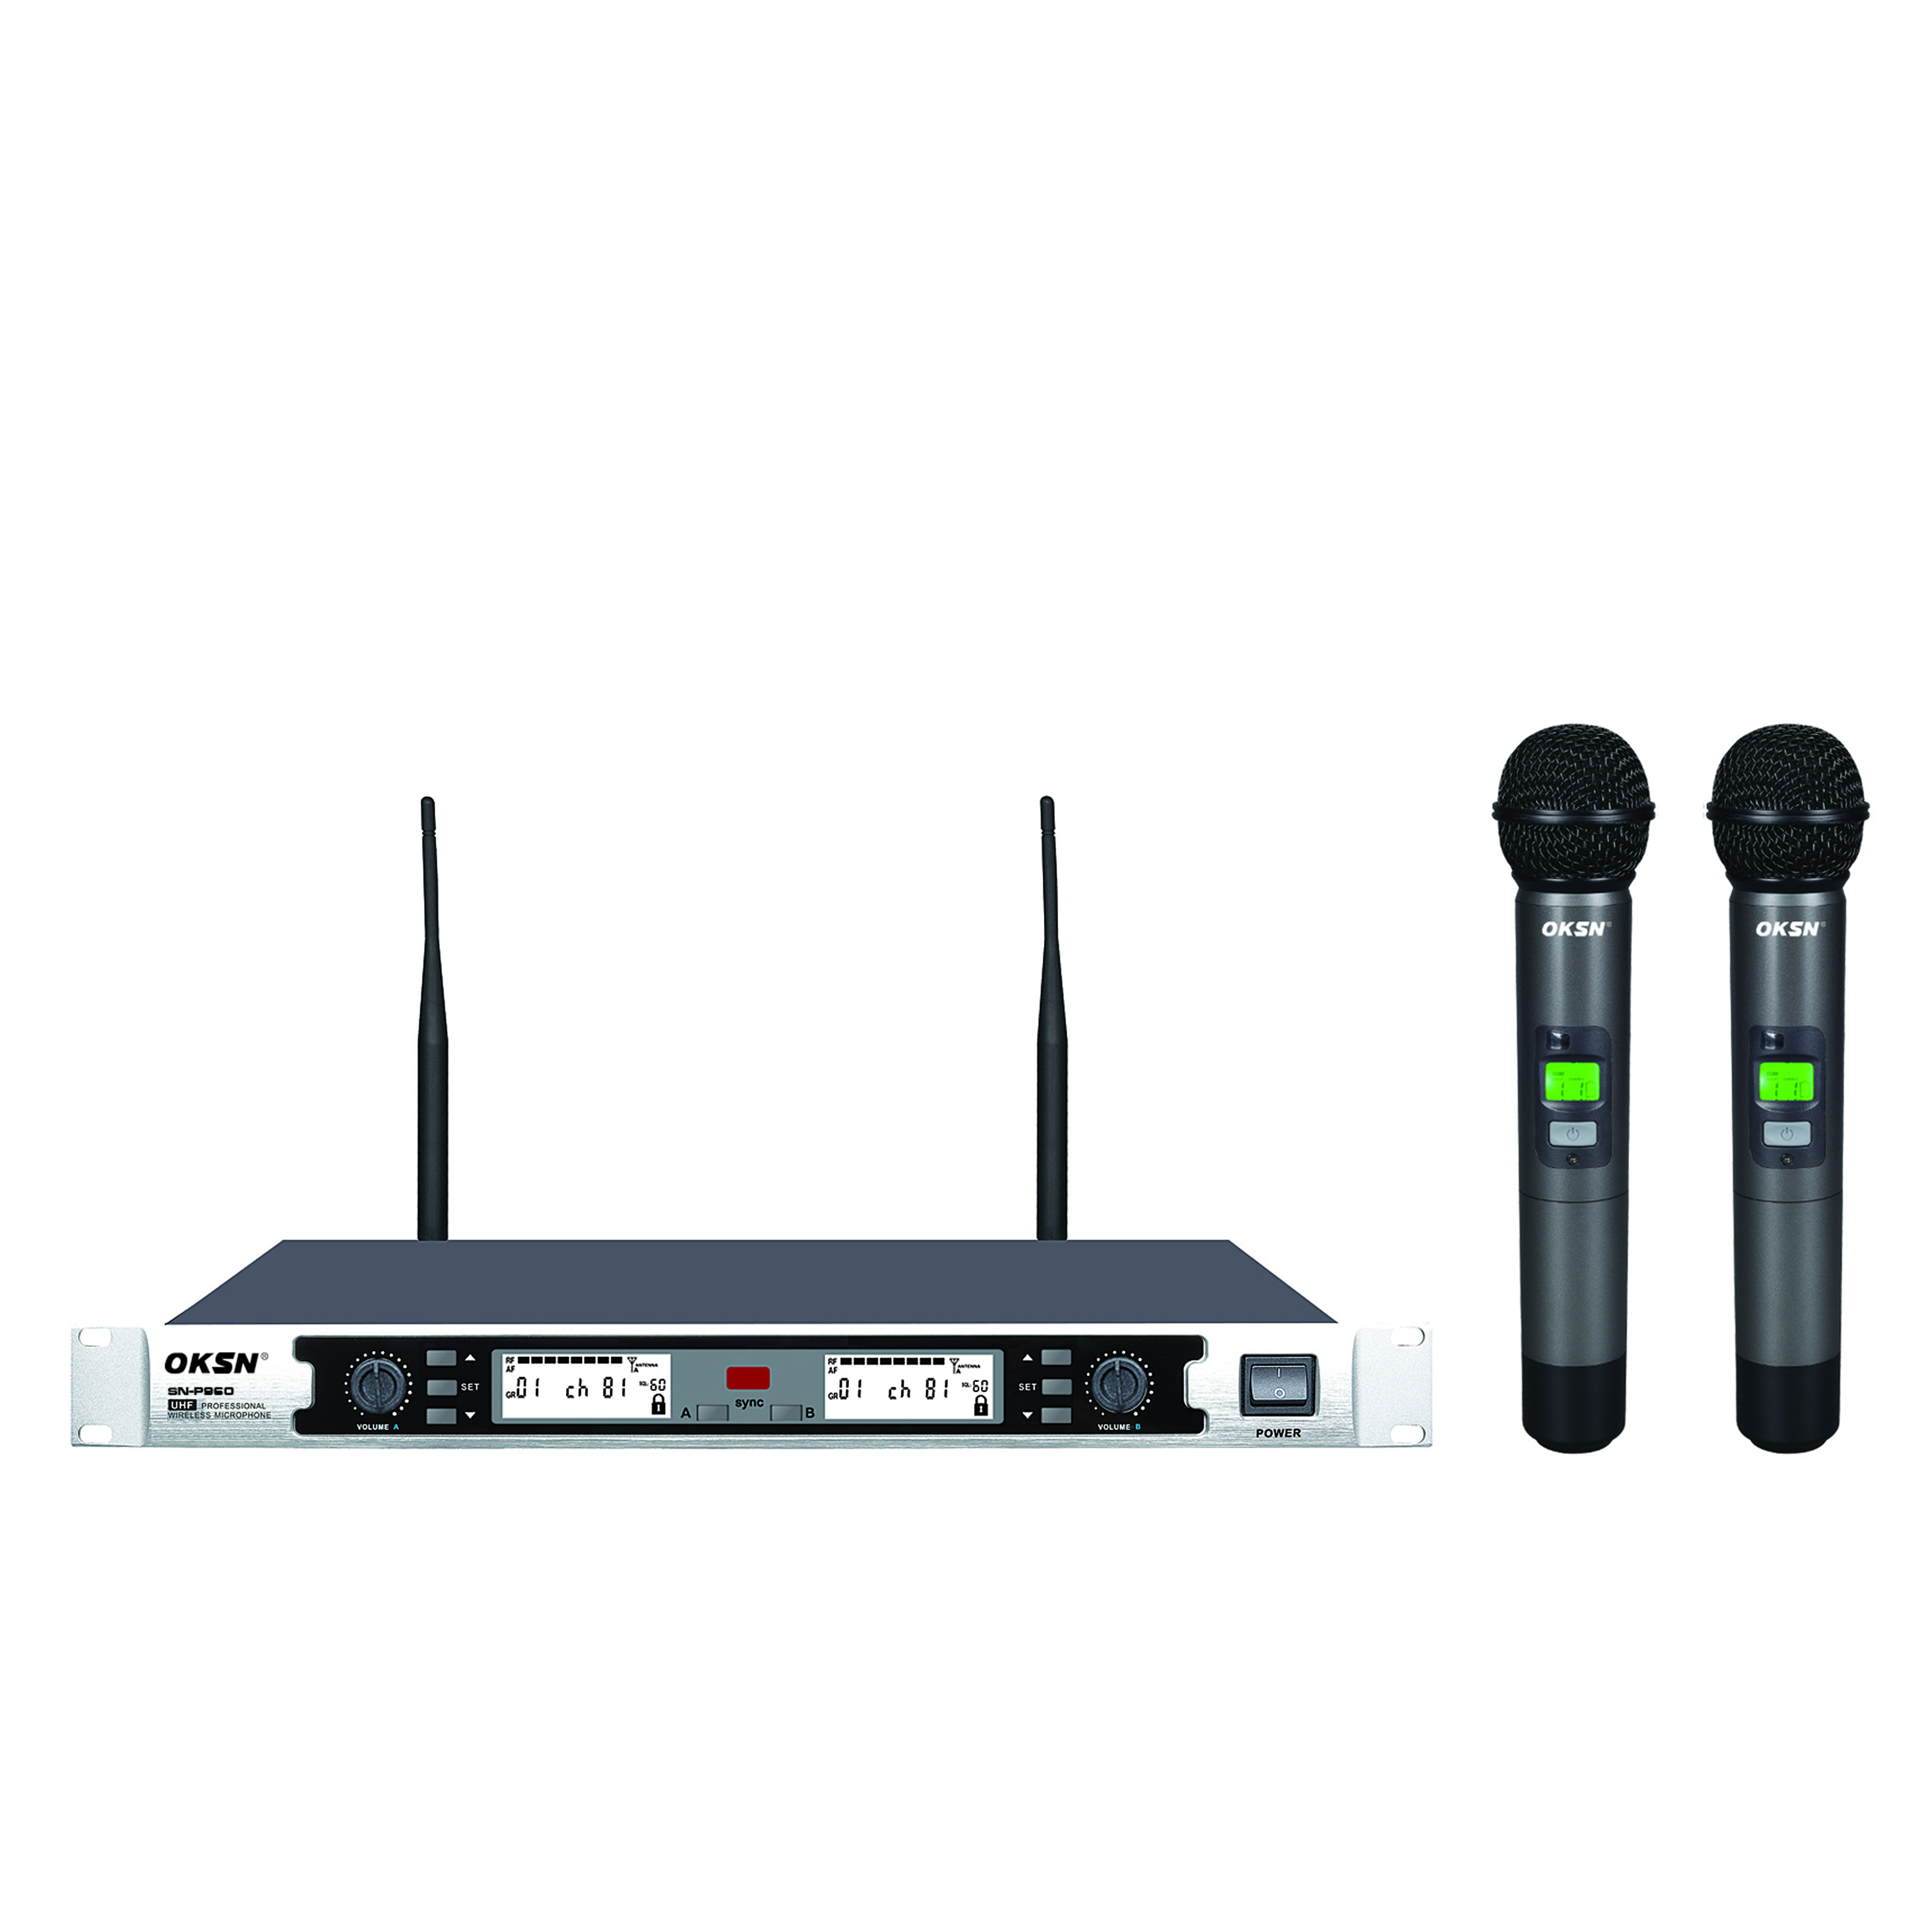 Luxury High Quality Professional UHF Wireless Microphone for KTV